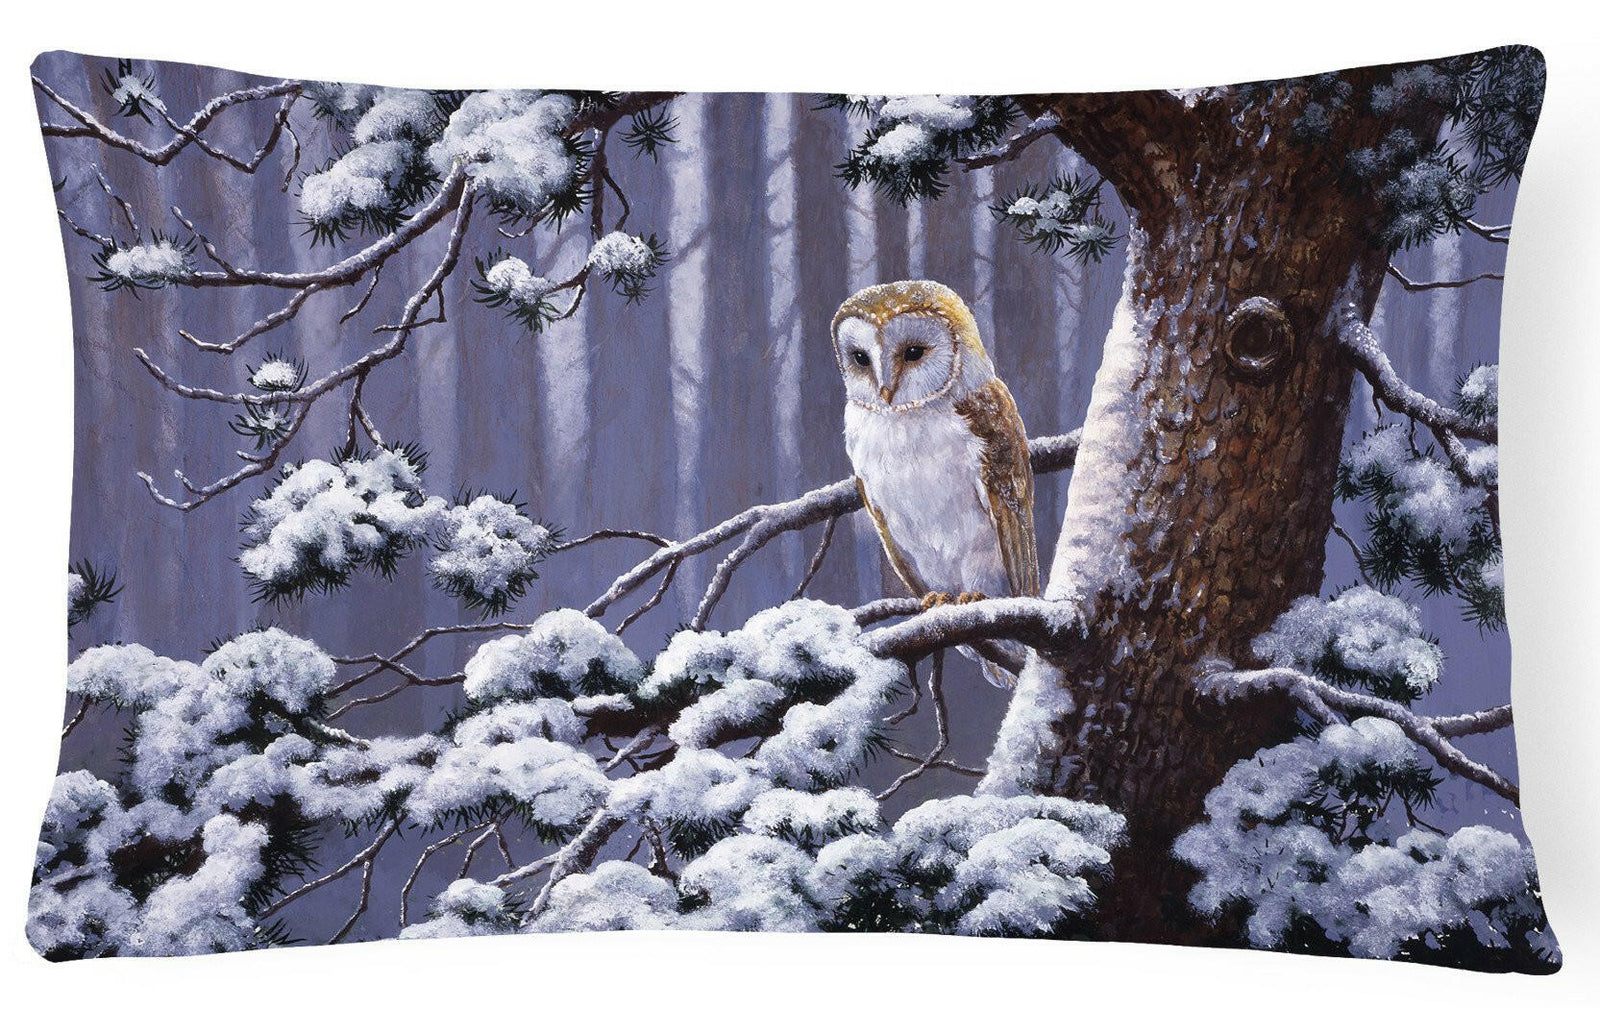 Owl on a Tree Branch in the Snow Fabric Decorative Pillow BDBA0303PW1216 by Caroline's Treasures